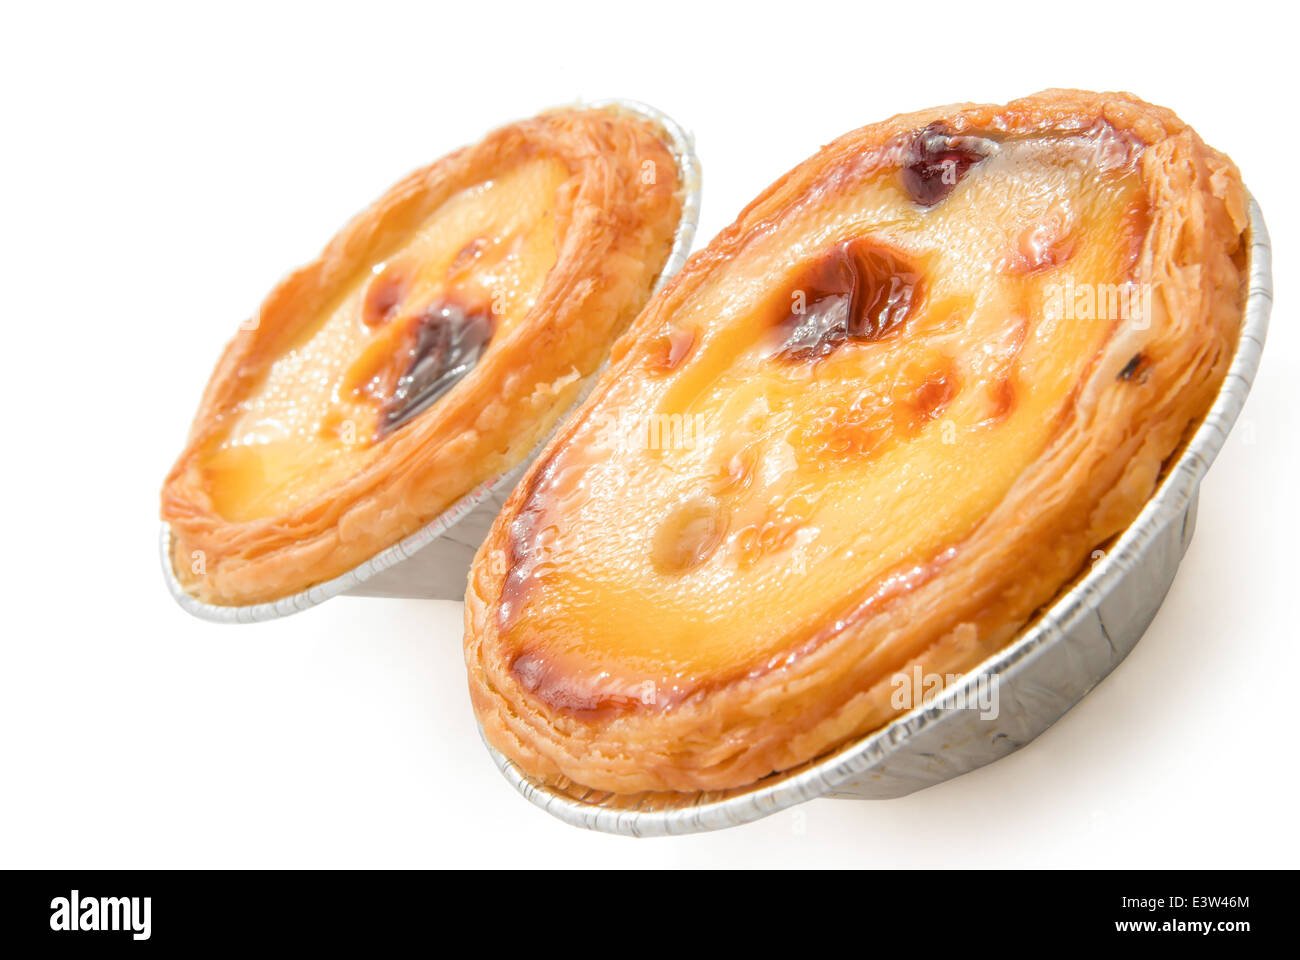 portuguese egg tart with clipping path Stock Photo